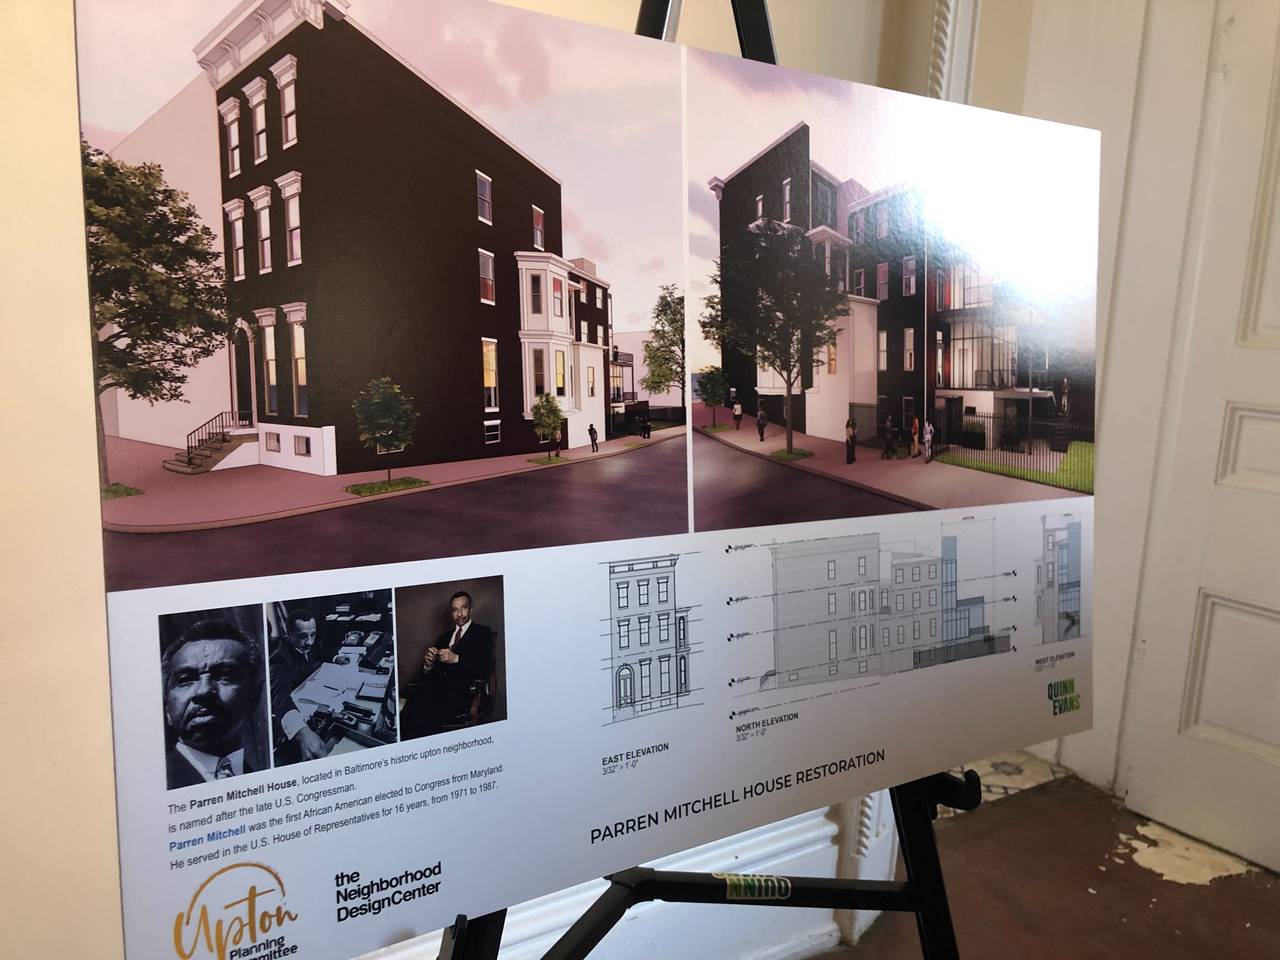 Baltimore City and civic leaders announced plans to renovate the former Parren Mitchell house into what they are calling the West Baltimore Civic and Entrepreneurship Center. The transformed building, which once hosted leaders of the Civil Rights Movement, will be used as a meeting space, offices, and a gallery that will showcase mementos of Mitchell’s life and career in Congress.